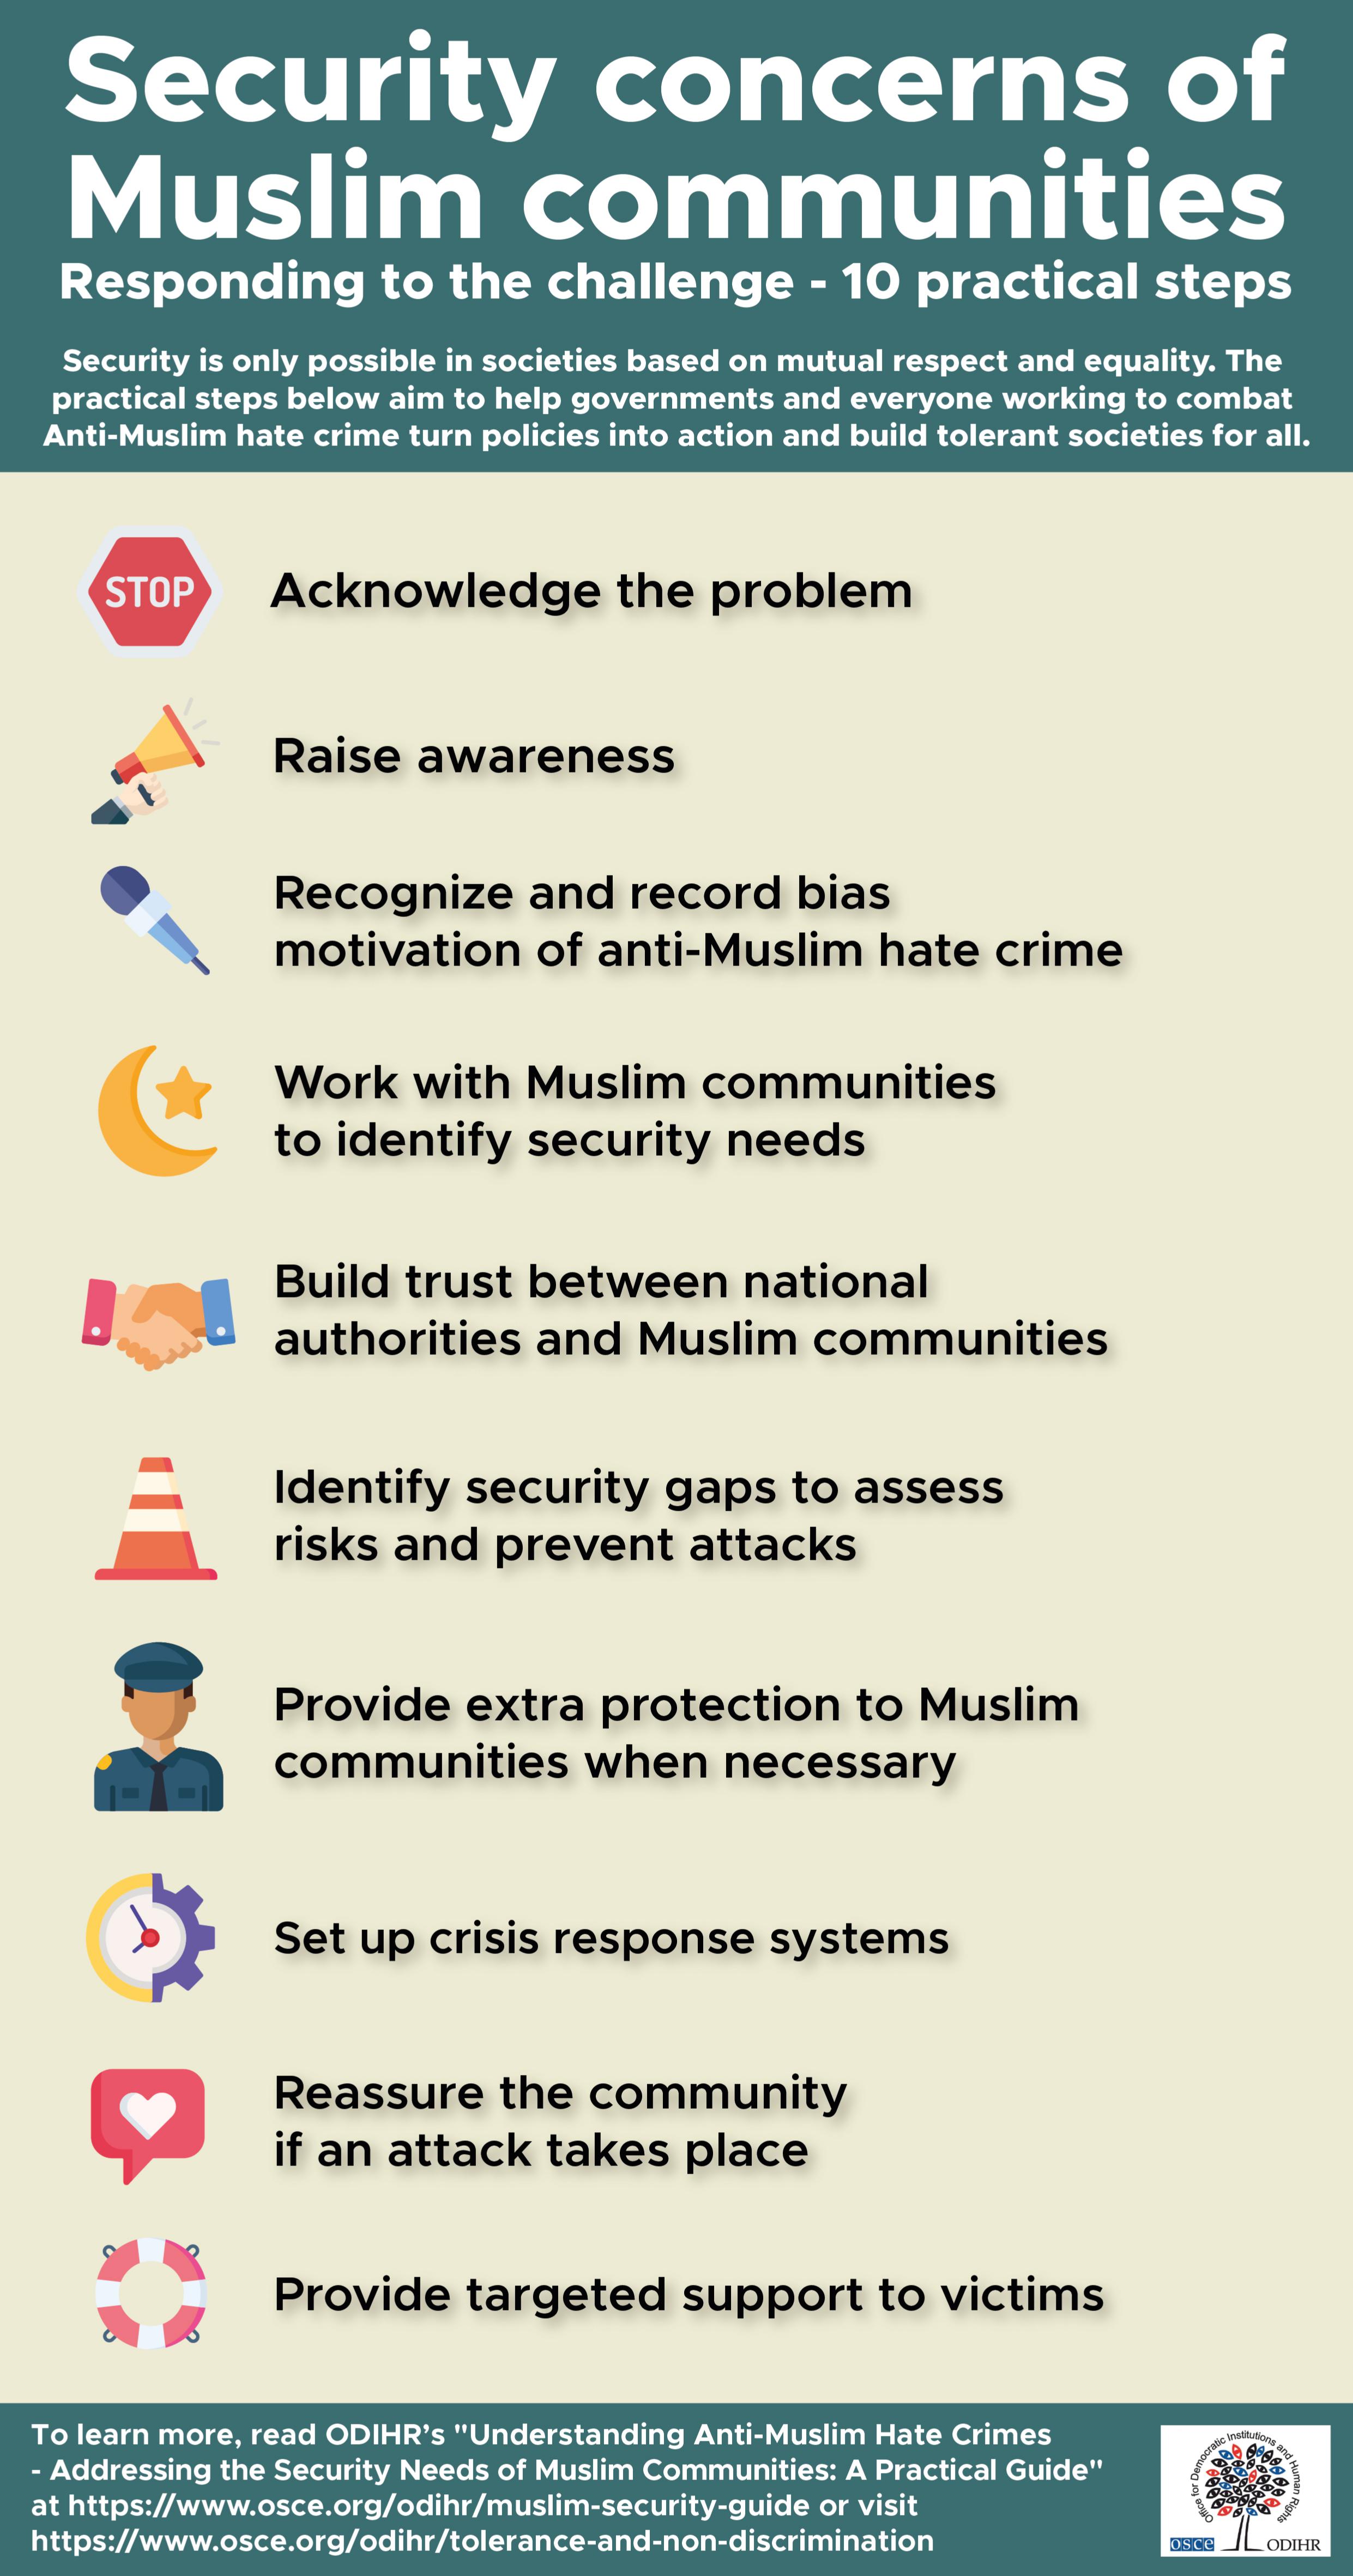 10 practical steps to respond to security needs of Muslim communities